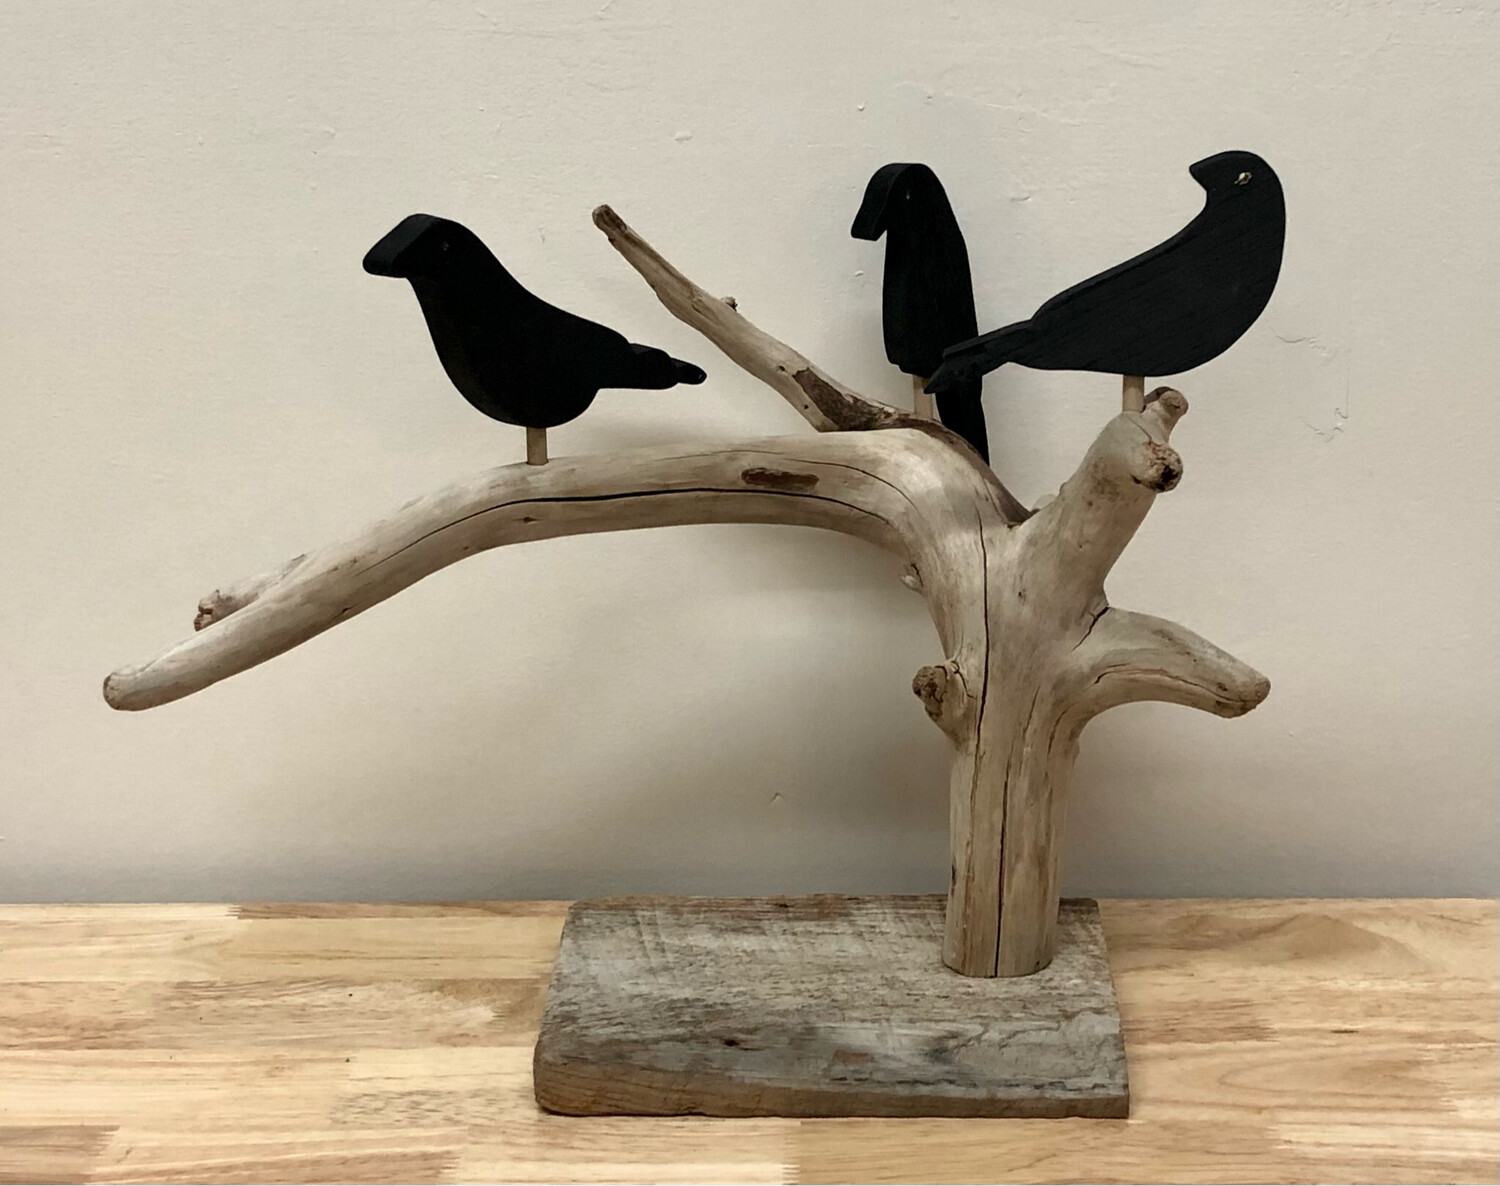 3 Crows on Driftwood- Jerry Walsh